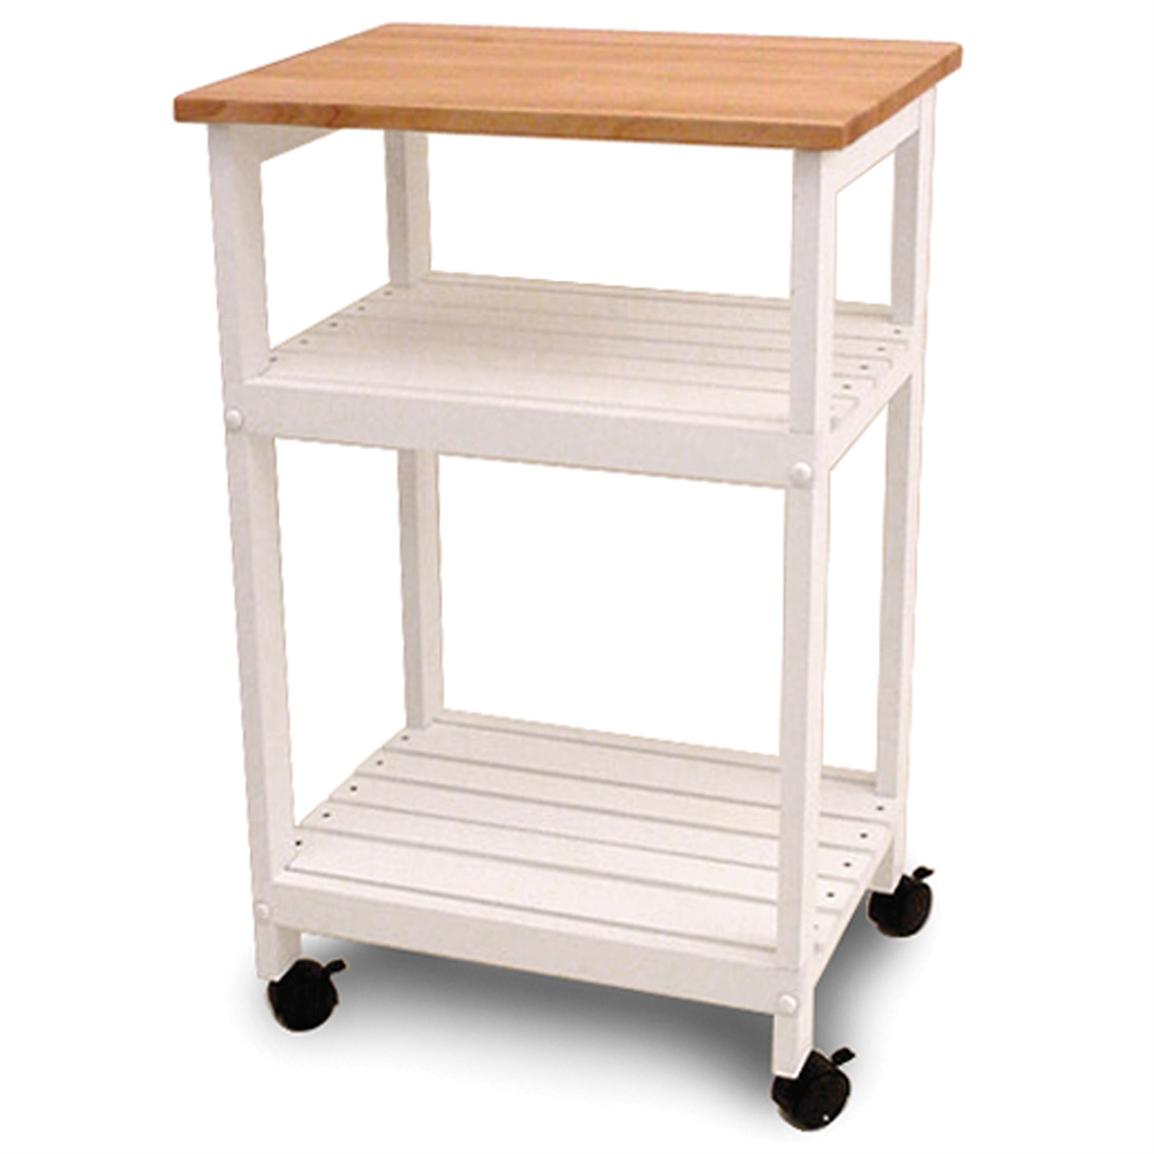 Utility / Microwave Butcher Block Cart - 110246, Kitchen & Dining at